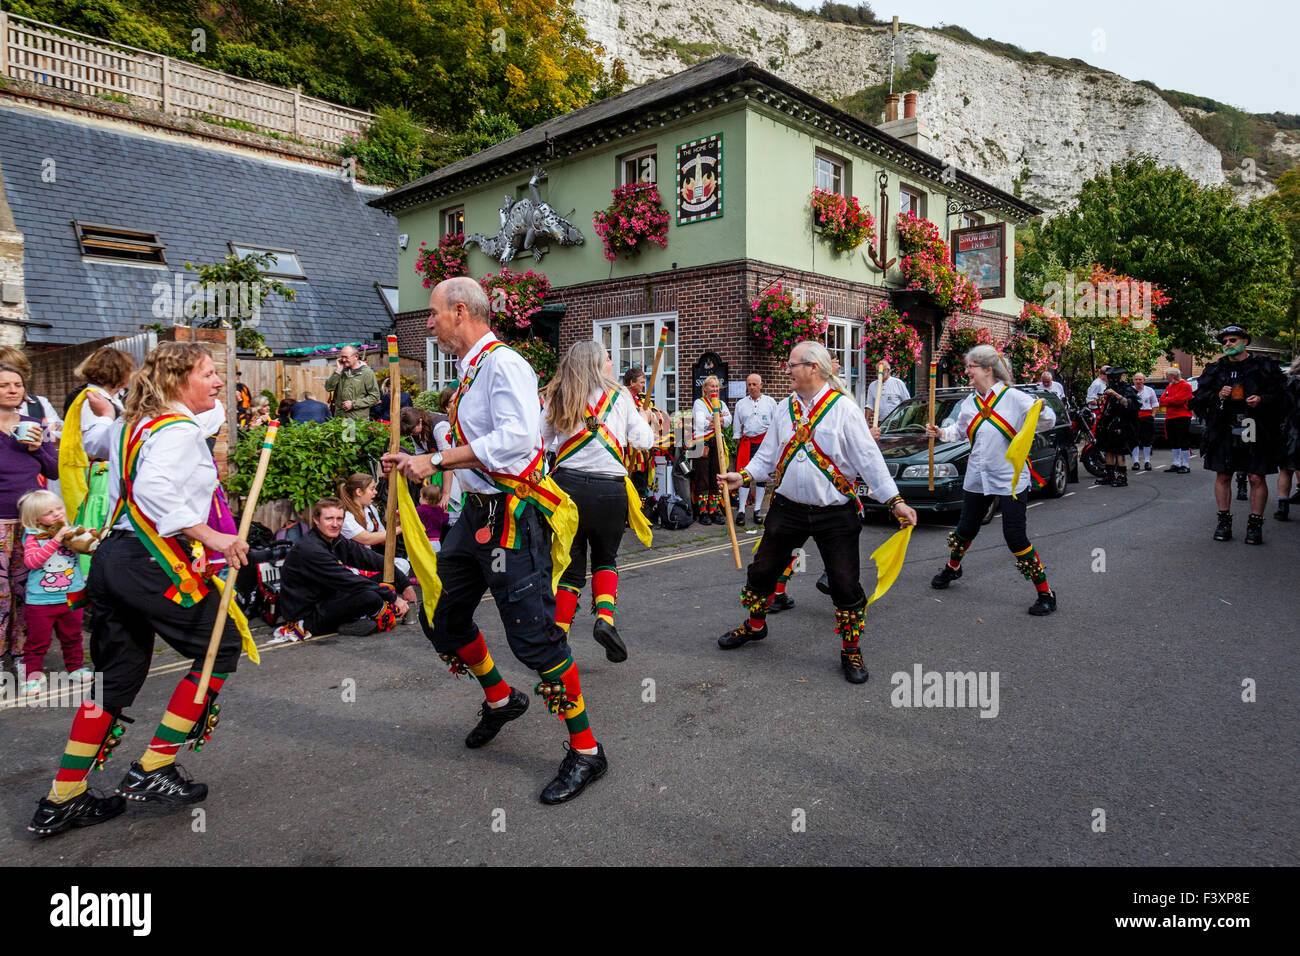 Rampant Rooster Morris Dancers Perform At The Snowdrop Pub In Lewes During The Towns Annual Folk Festival, Lewes, Sussex, UK Stock Photo